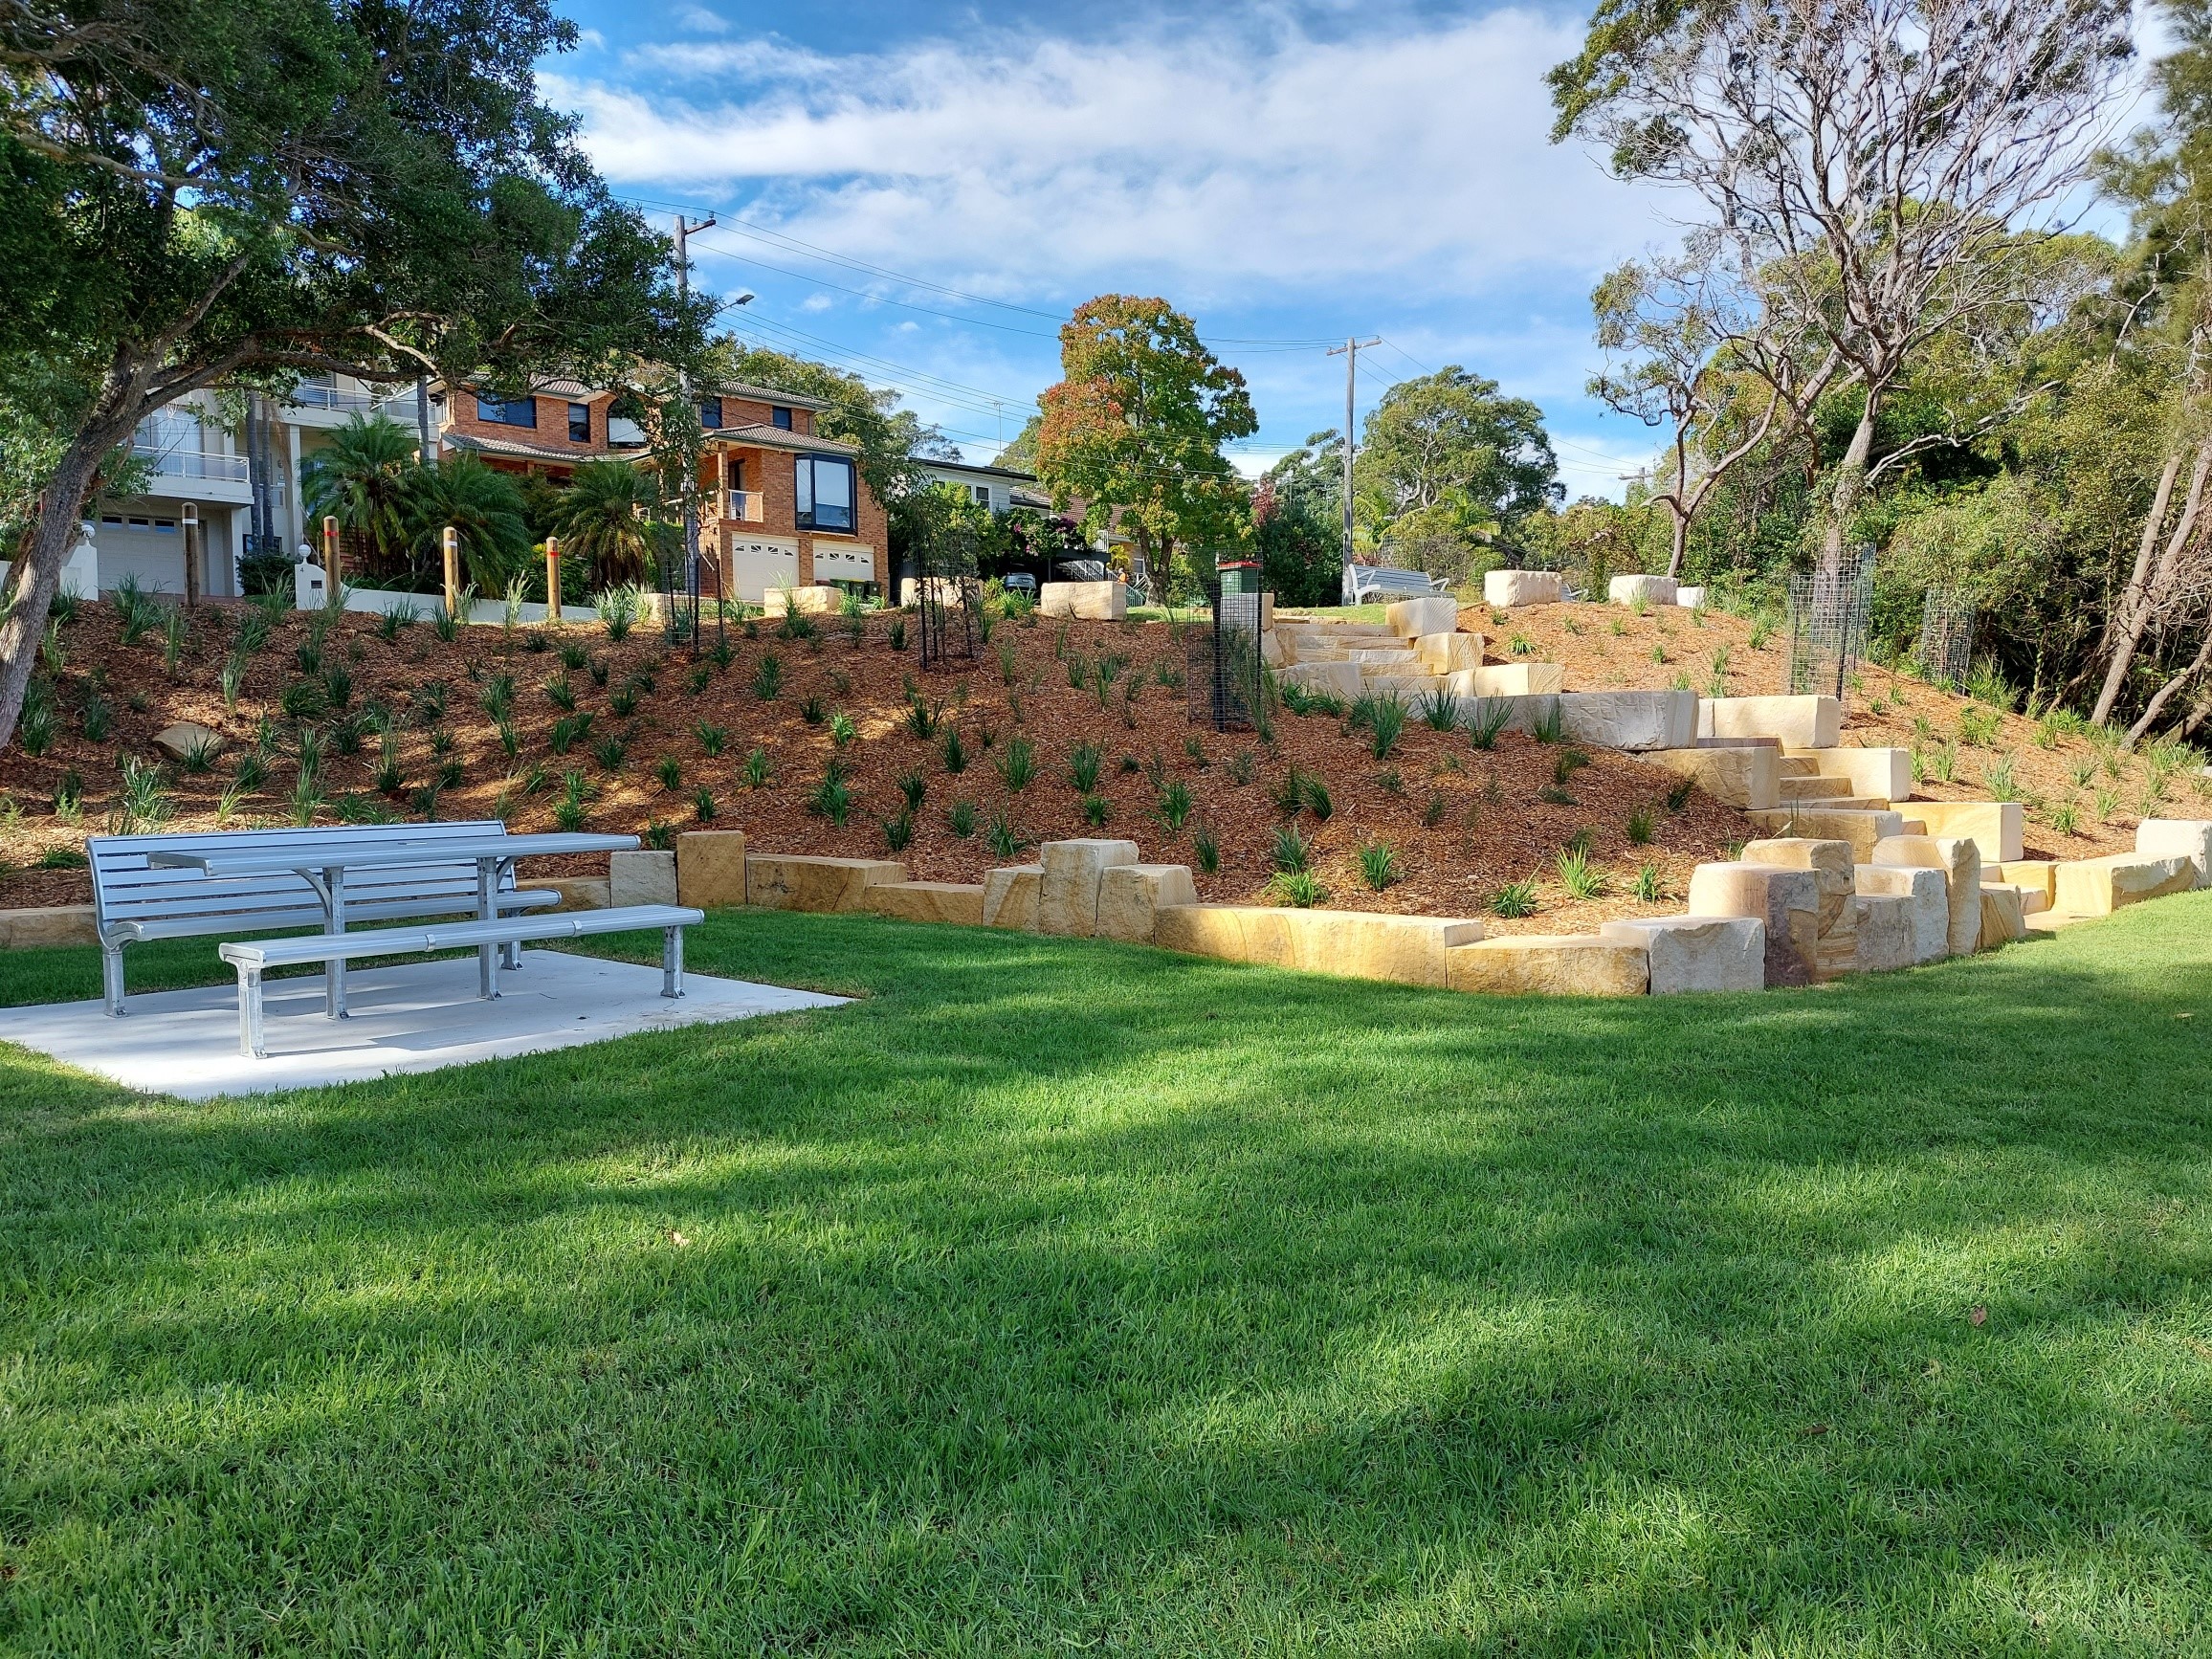 Seating and garden bed in foreshore reserve